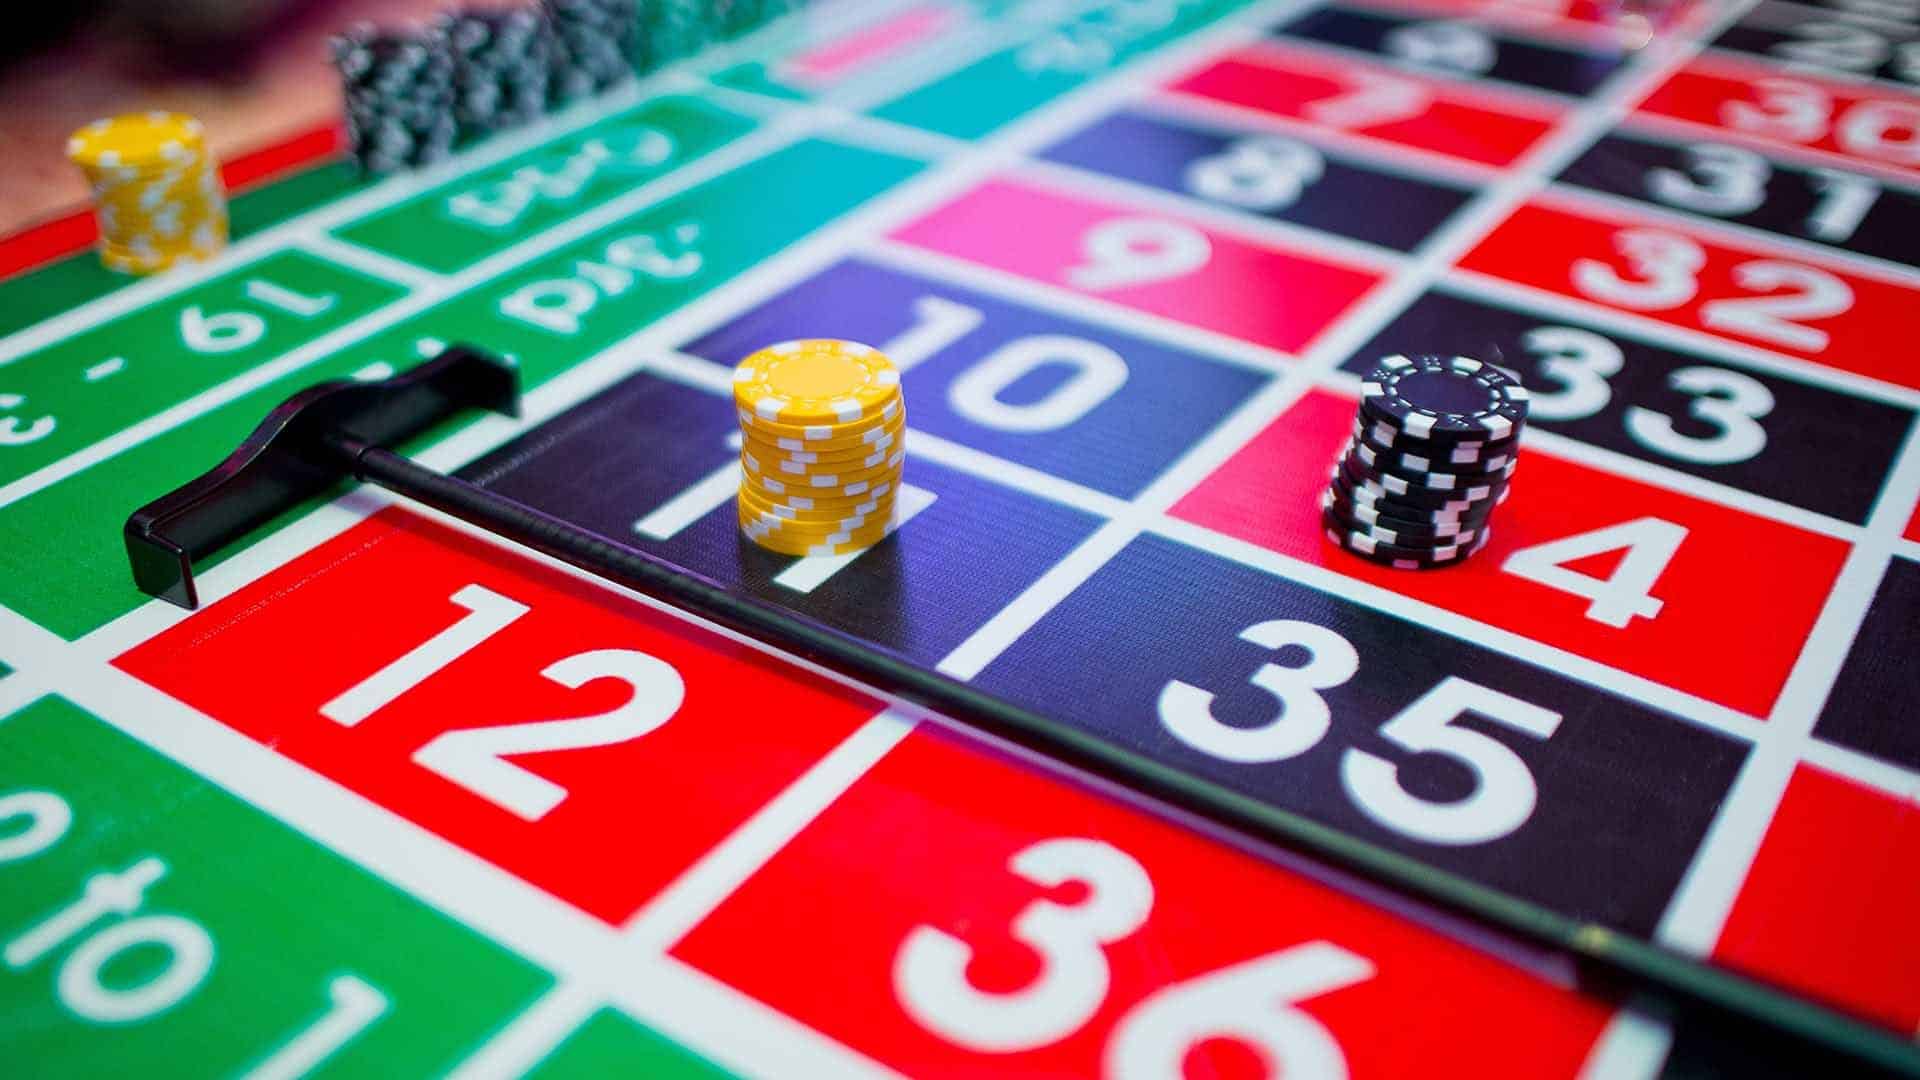 image of a roulette table in a casino with chips on 11 and 14